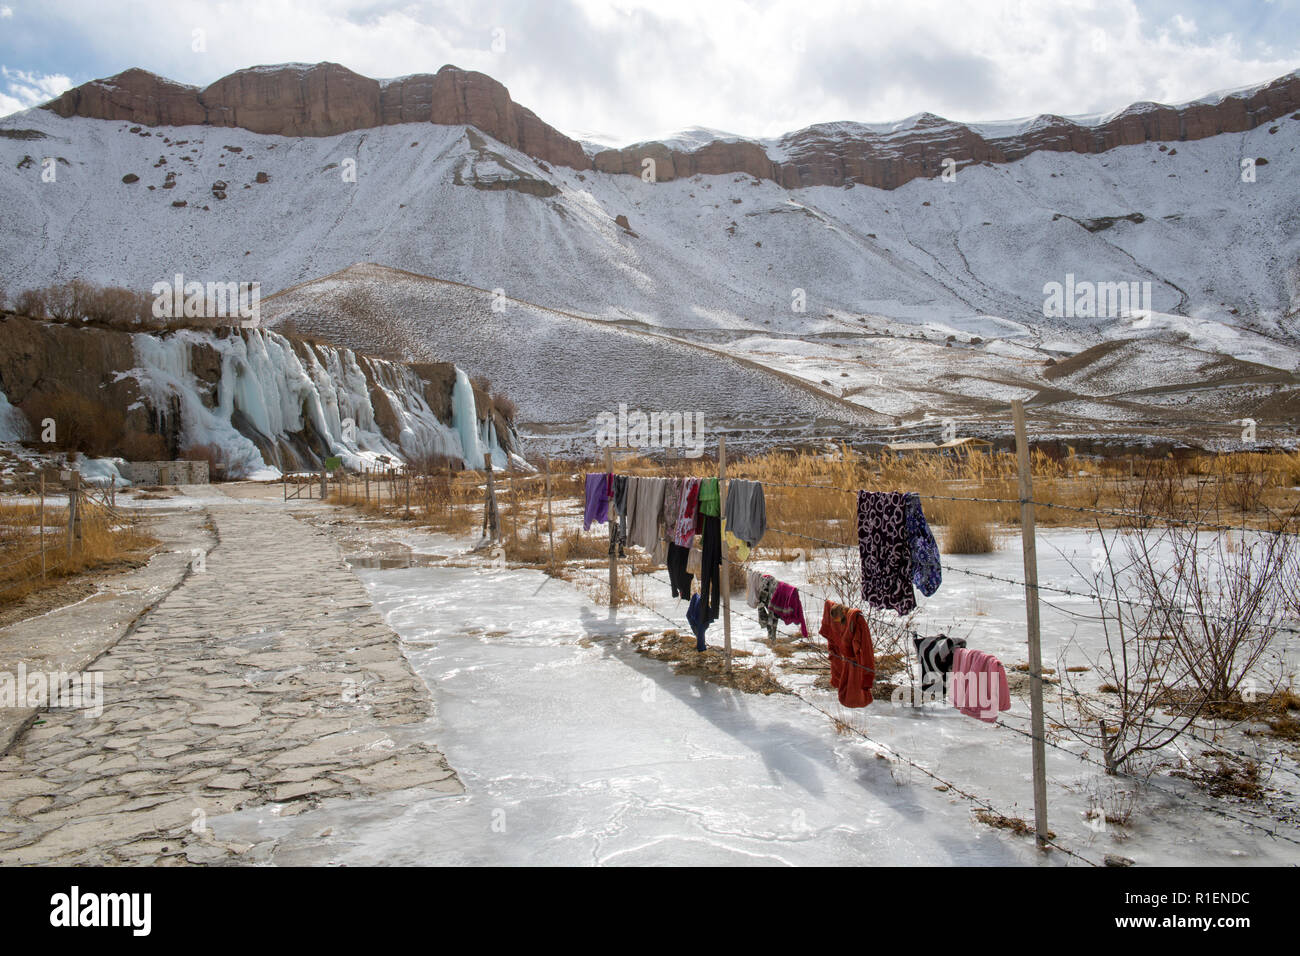 Villagers Drying Laundry Near Band-e Amir Lake, Band-e Amir National Park, Bamyan Province, Afghanistan Stock Photo